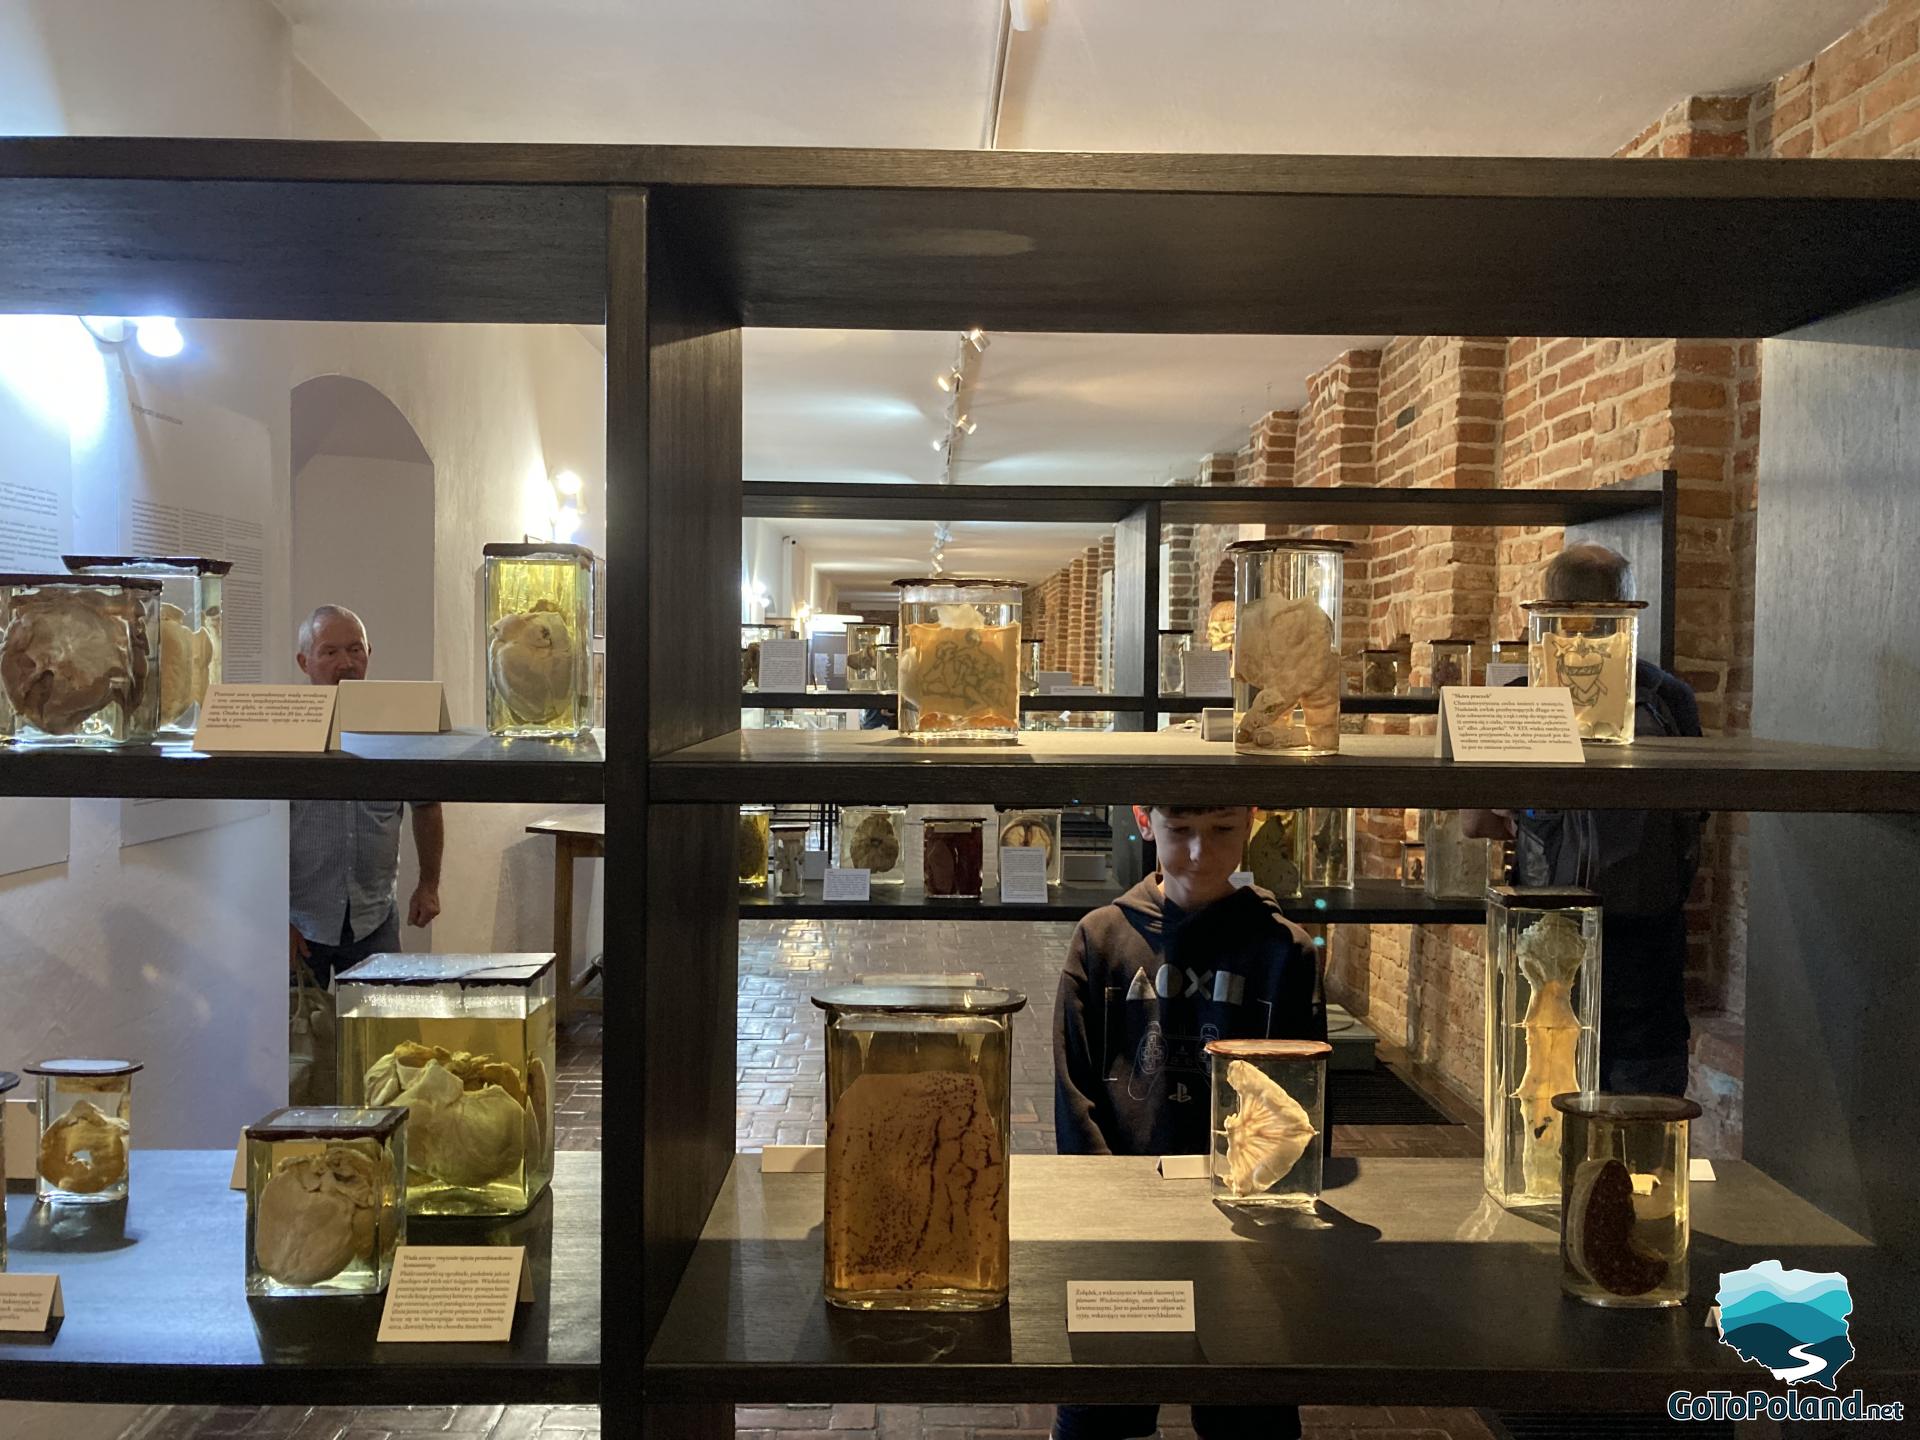 an exhibition with jars in which human organs were placed